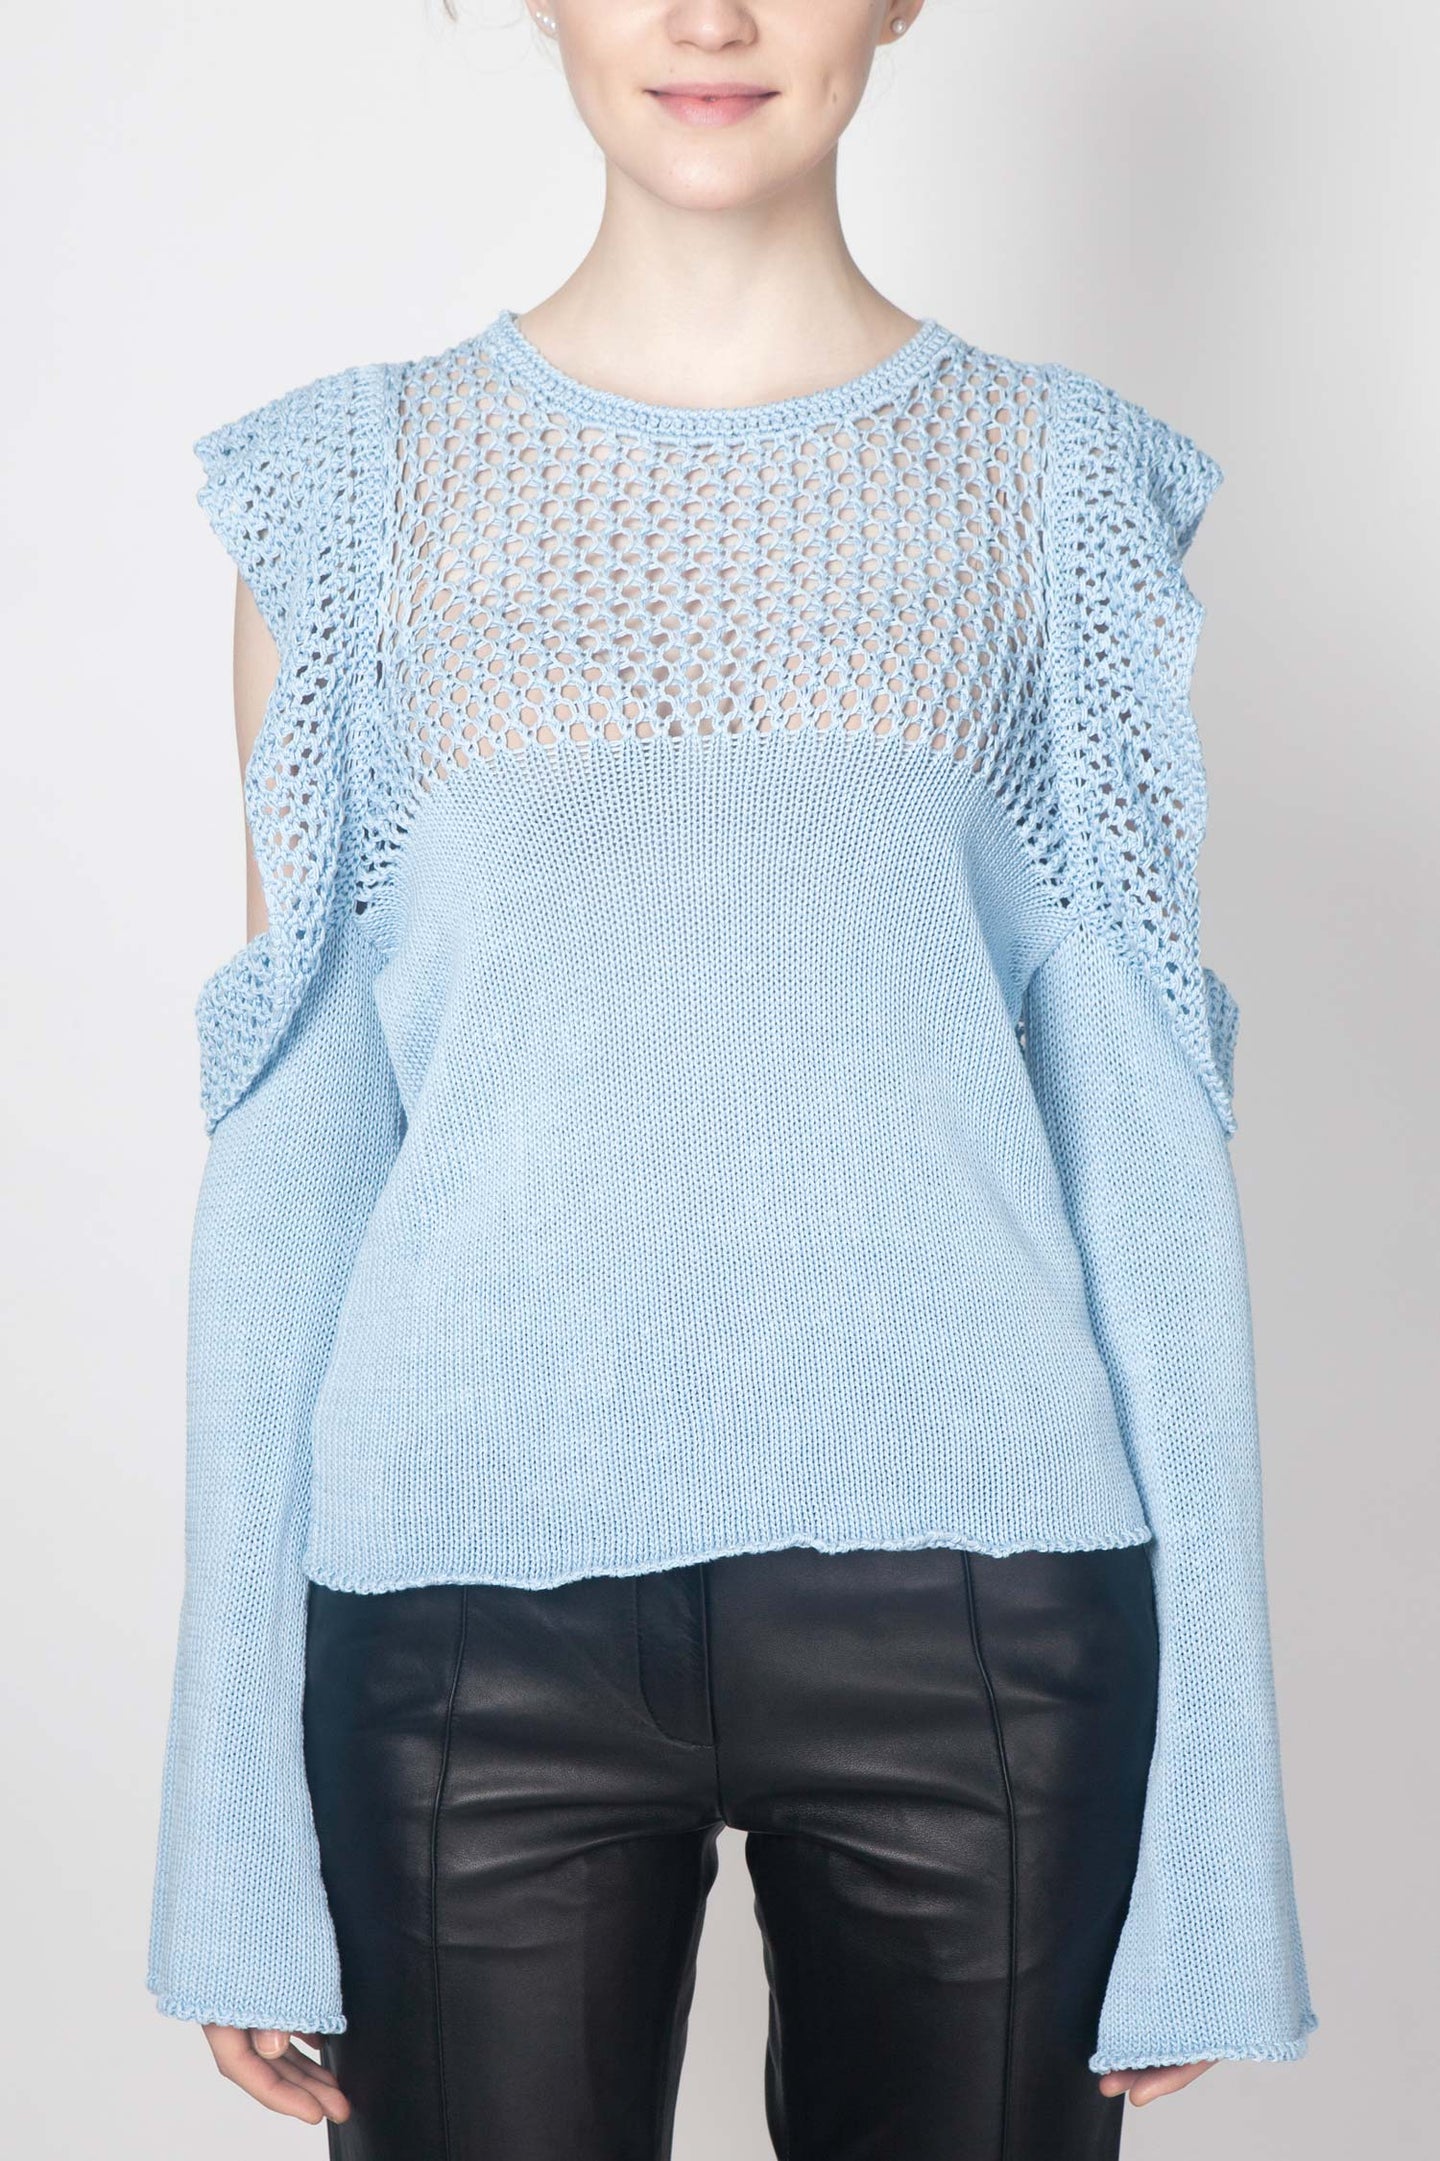 Cut-out Sweater with Elongated Sleeves